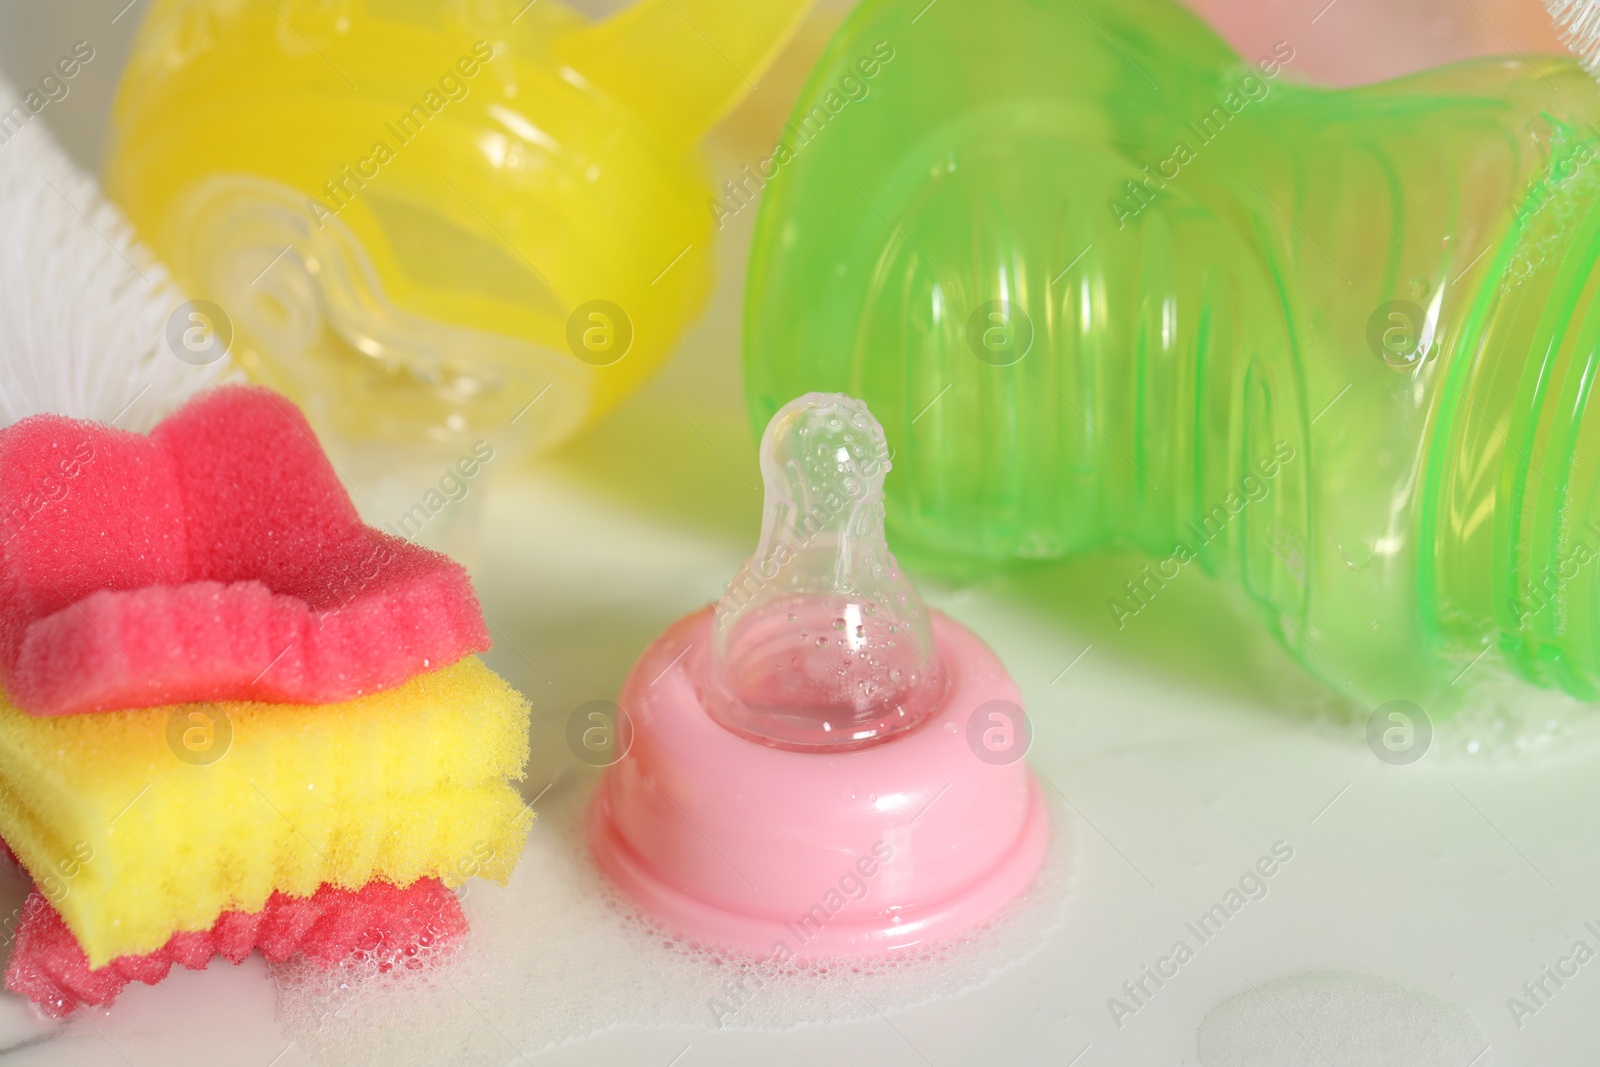 Photo of Wet baby bottles and nipple after sterilization near sponge on white table, closeup